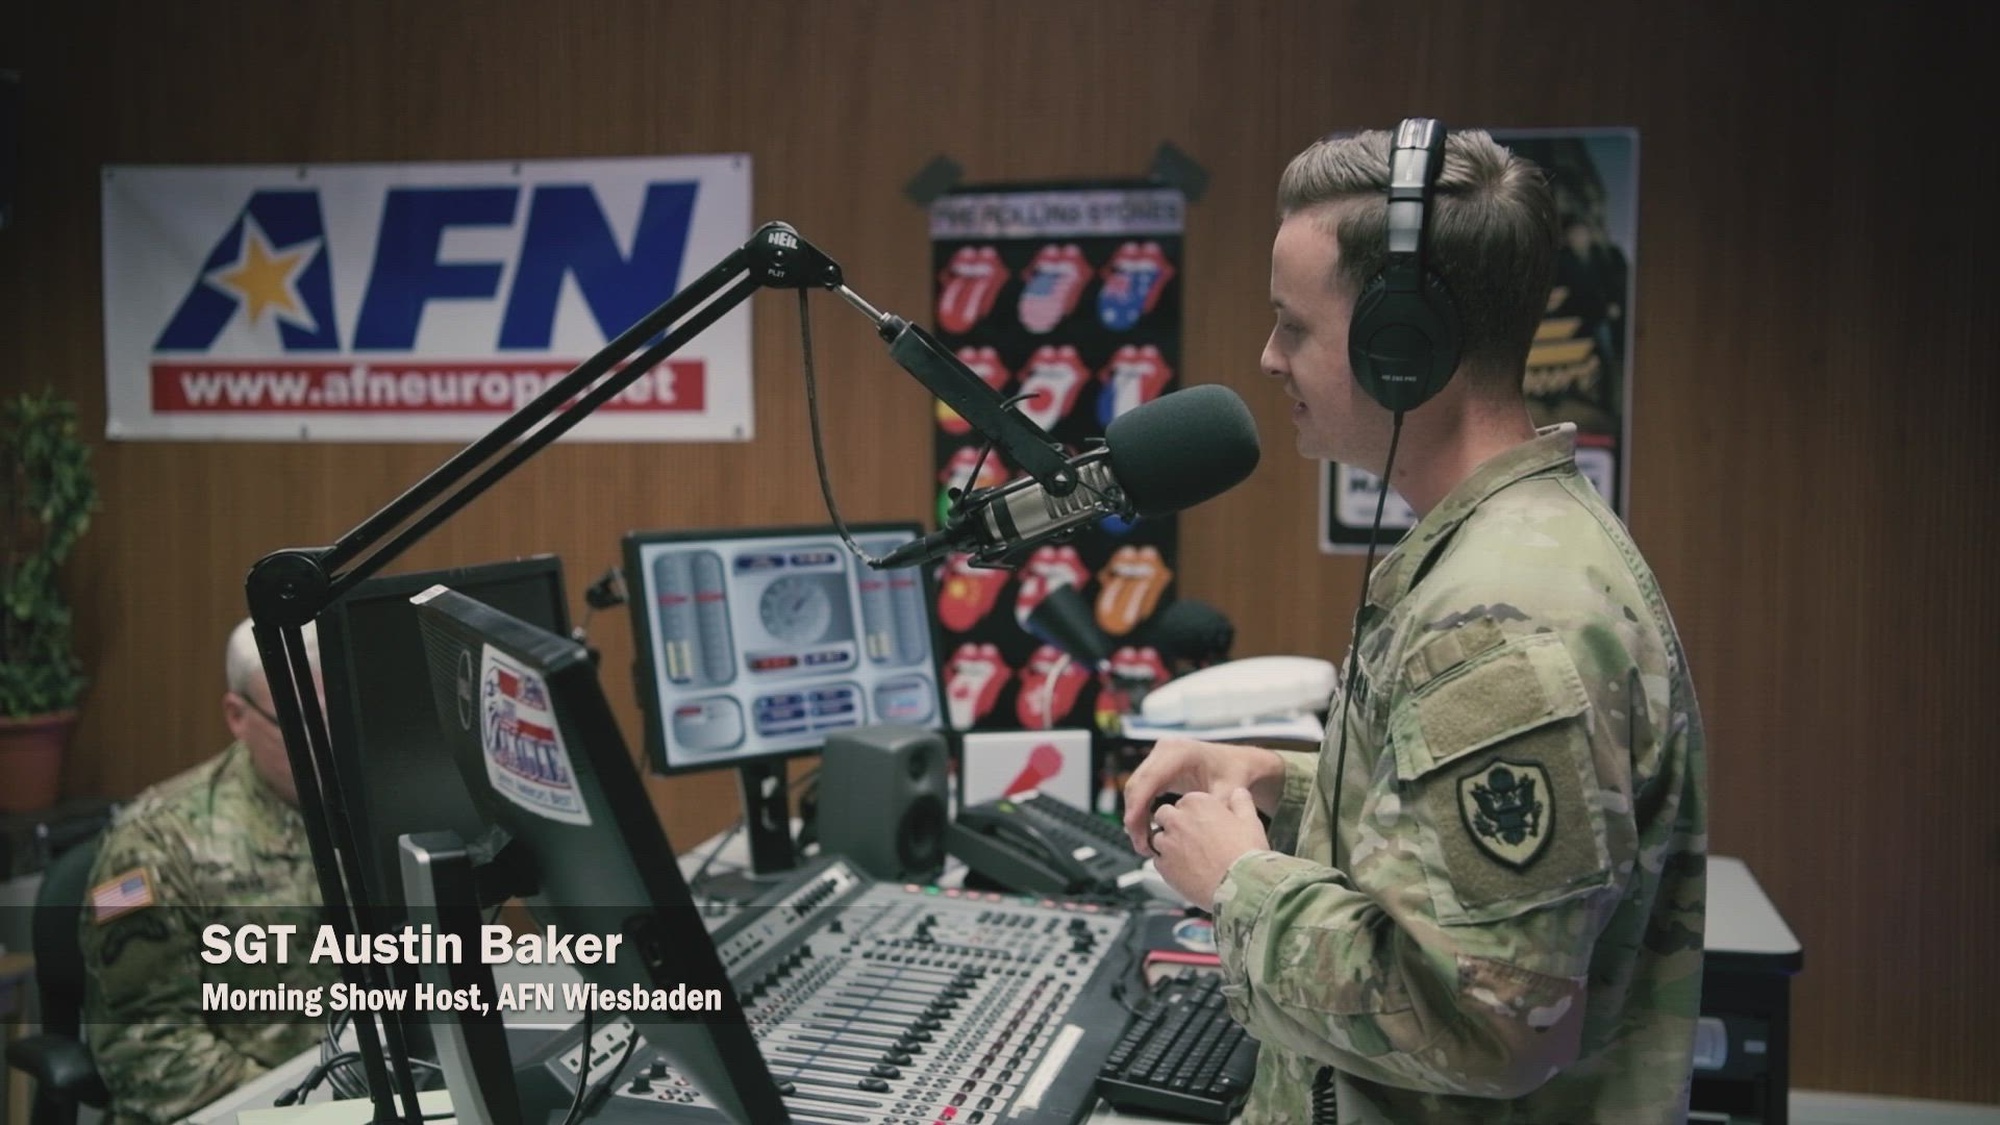 U.S. Army Command Sgt. Maj. Jeremiah Inman, command sergeant major of U.S. Army Europe and Africa, speaks with Sgt. Austin Baker, a public affairs broadcast sergeant assigned to American Forces Network Wiesbaden, during “The Eagle” morning show to show information about the upcoming USAREUR-AF Best Squad Competition, on Clay Kaserne, Wiesbaden, DE, July 19, 2022. Team from across U.S. Army Europe and Africa will meet at Grafenwoehr Training Area in U.S. Army Garrison Bavaria, to compete for the title of Best Squad. (U.S. Army video by Staff Sgt. Ashley M. Morris)